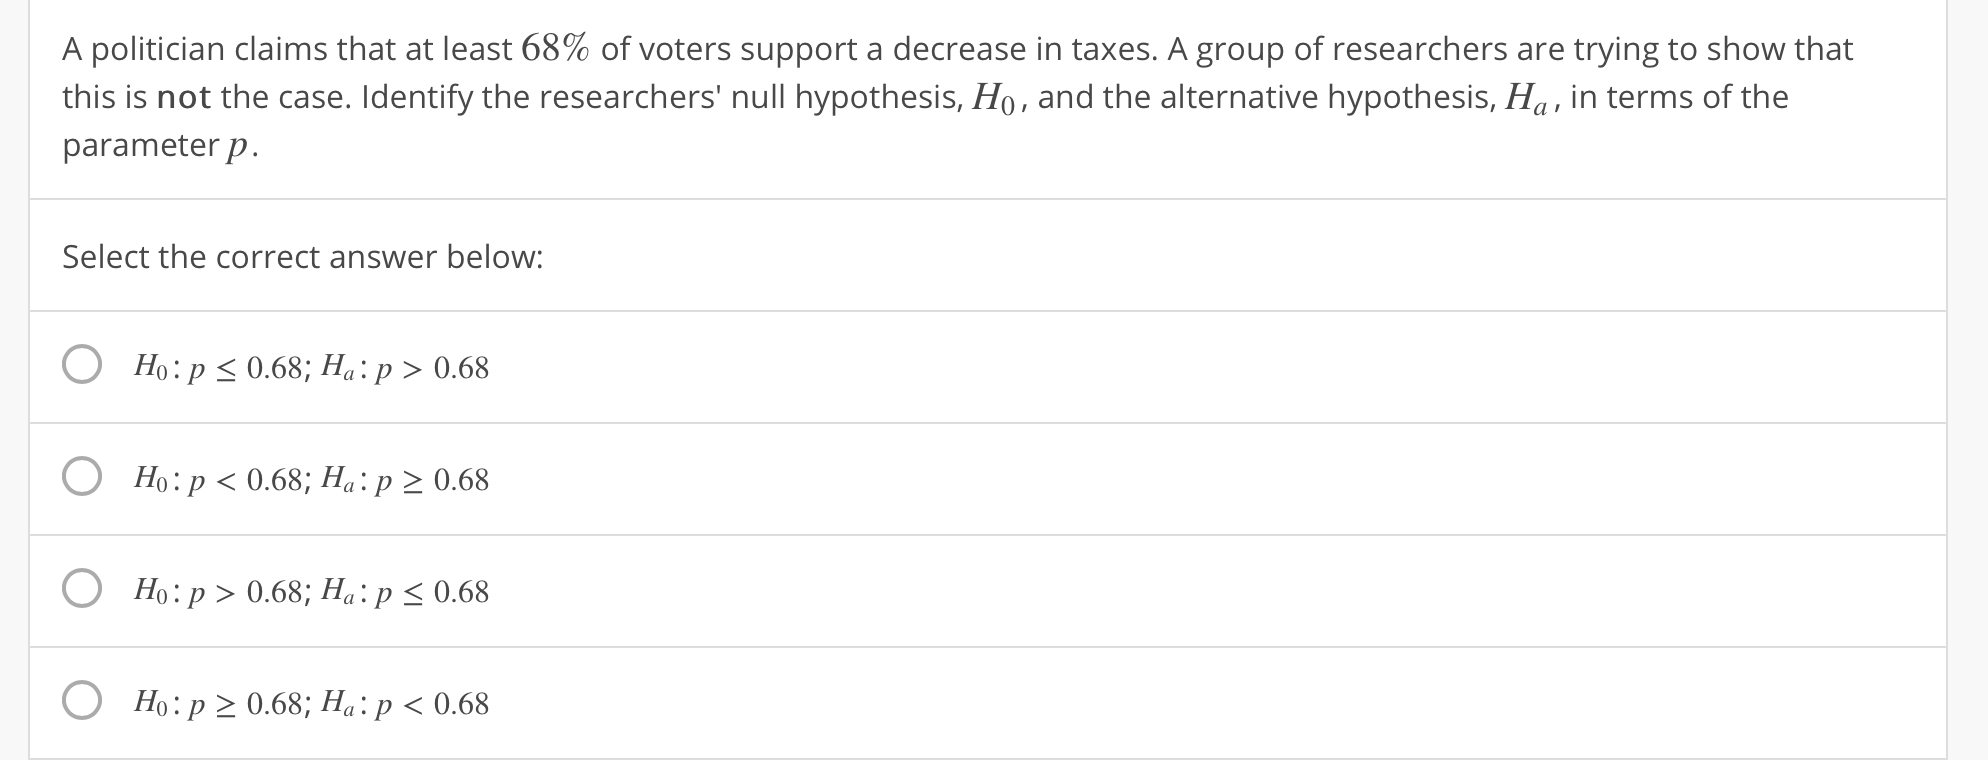 A politician claims that at least 68% of voters support a decrease in taxes. A group of researchers are trying to show that
this is not the case. Identify the researchers' null hypothesis, Ho, and the alternative hypothesis, Ha, in terms of the
parameter p
Select the correct answer below:
O Ho:p s 0.68; Ha: p 0.68
O Ho:p < 0.68; Ha: p 2 0.68
O Ho:p>0.68; H:p s0.68
O Ho: p 2 0.68; Ha: p < 0.68
